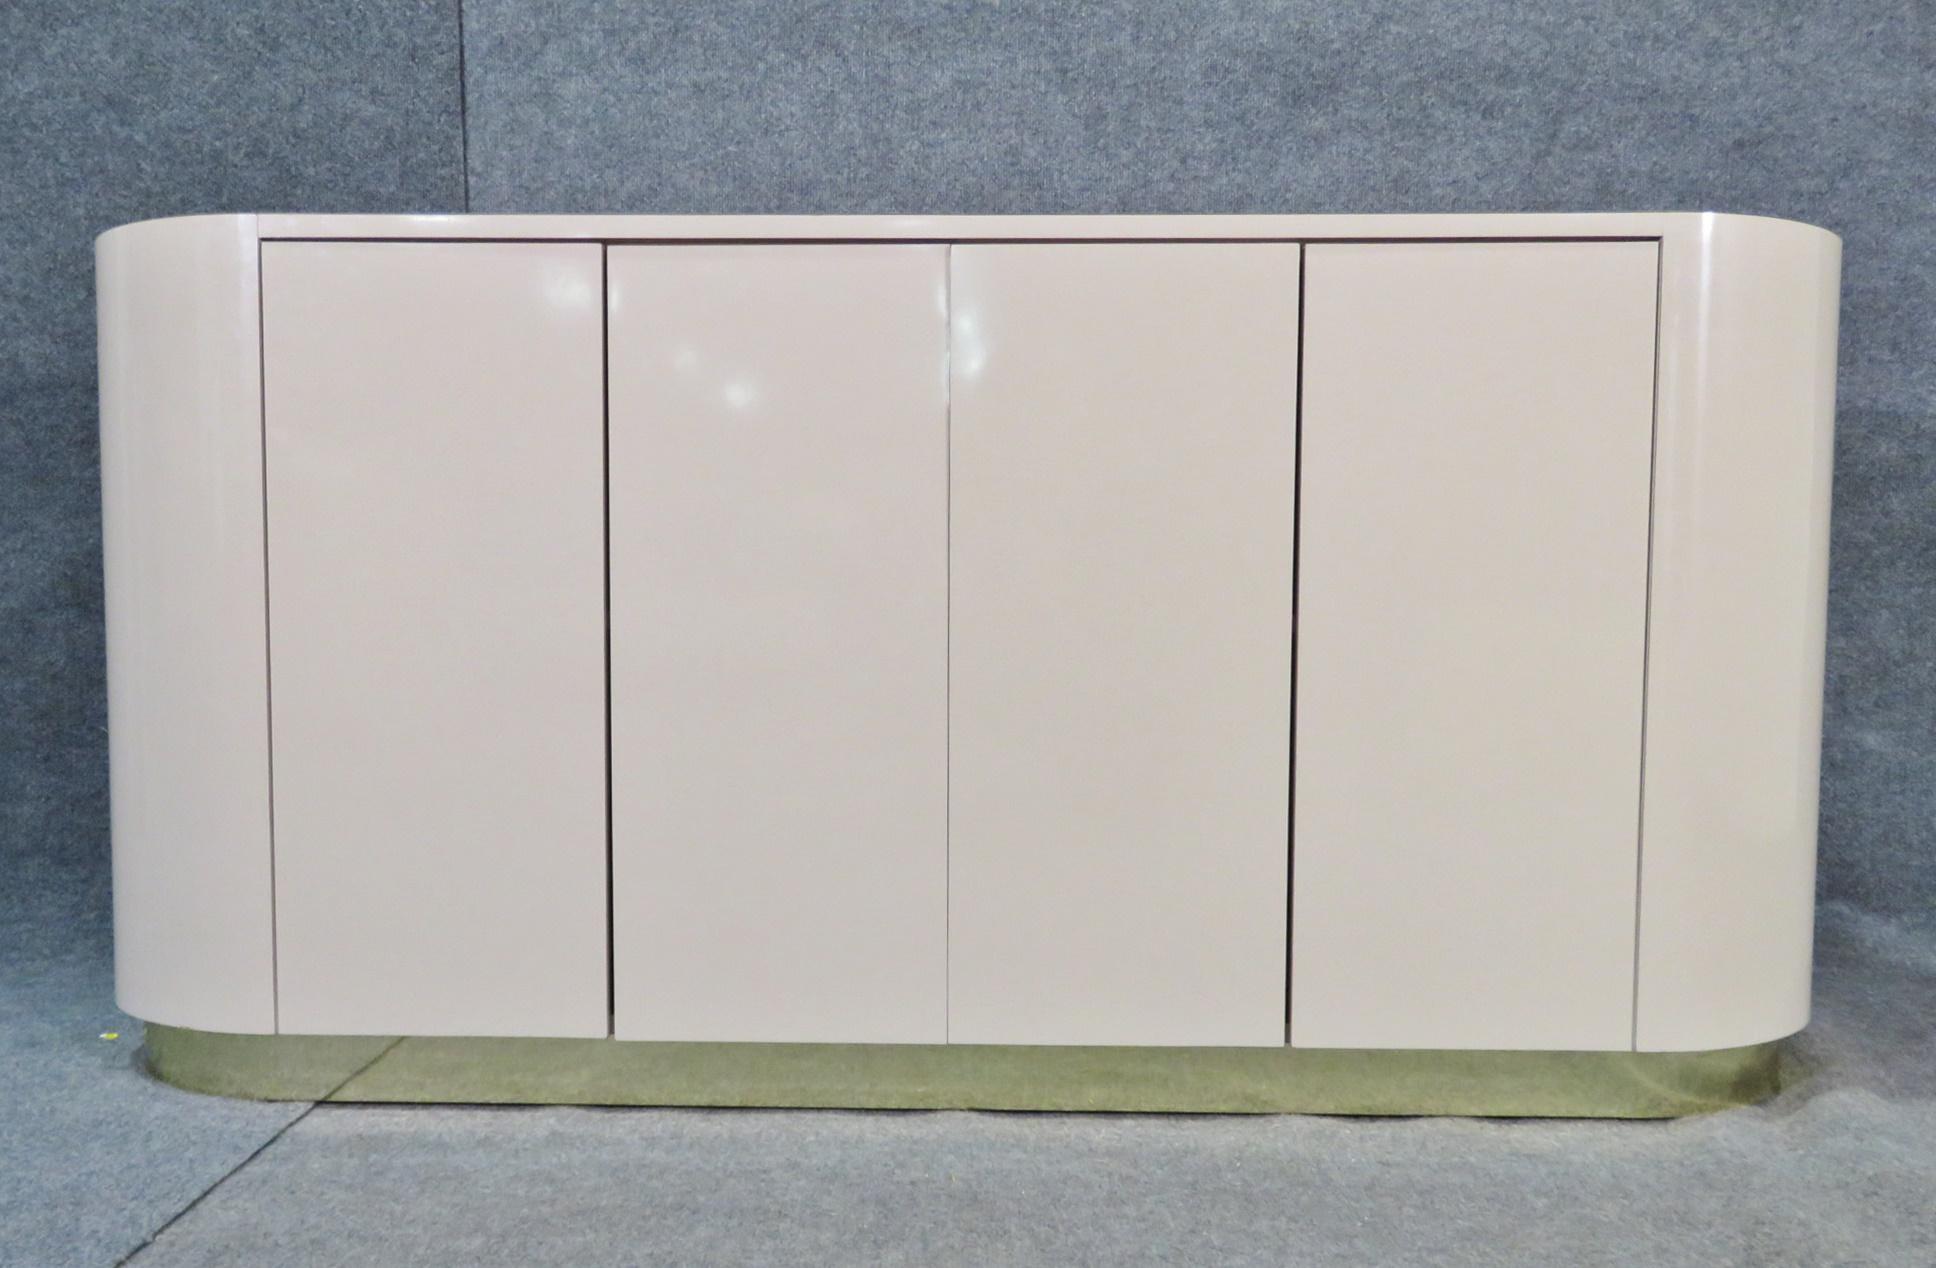 A beautiful Mid-Century Modern server with a smooth surface and minimal design, this piece styled after the work of Karl Springer is impressive and functional. Four doors open to reveal shelves and storage within. Please confirm item location with